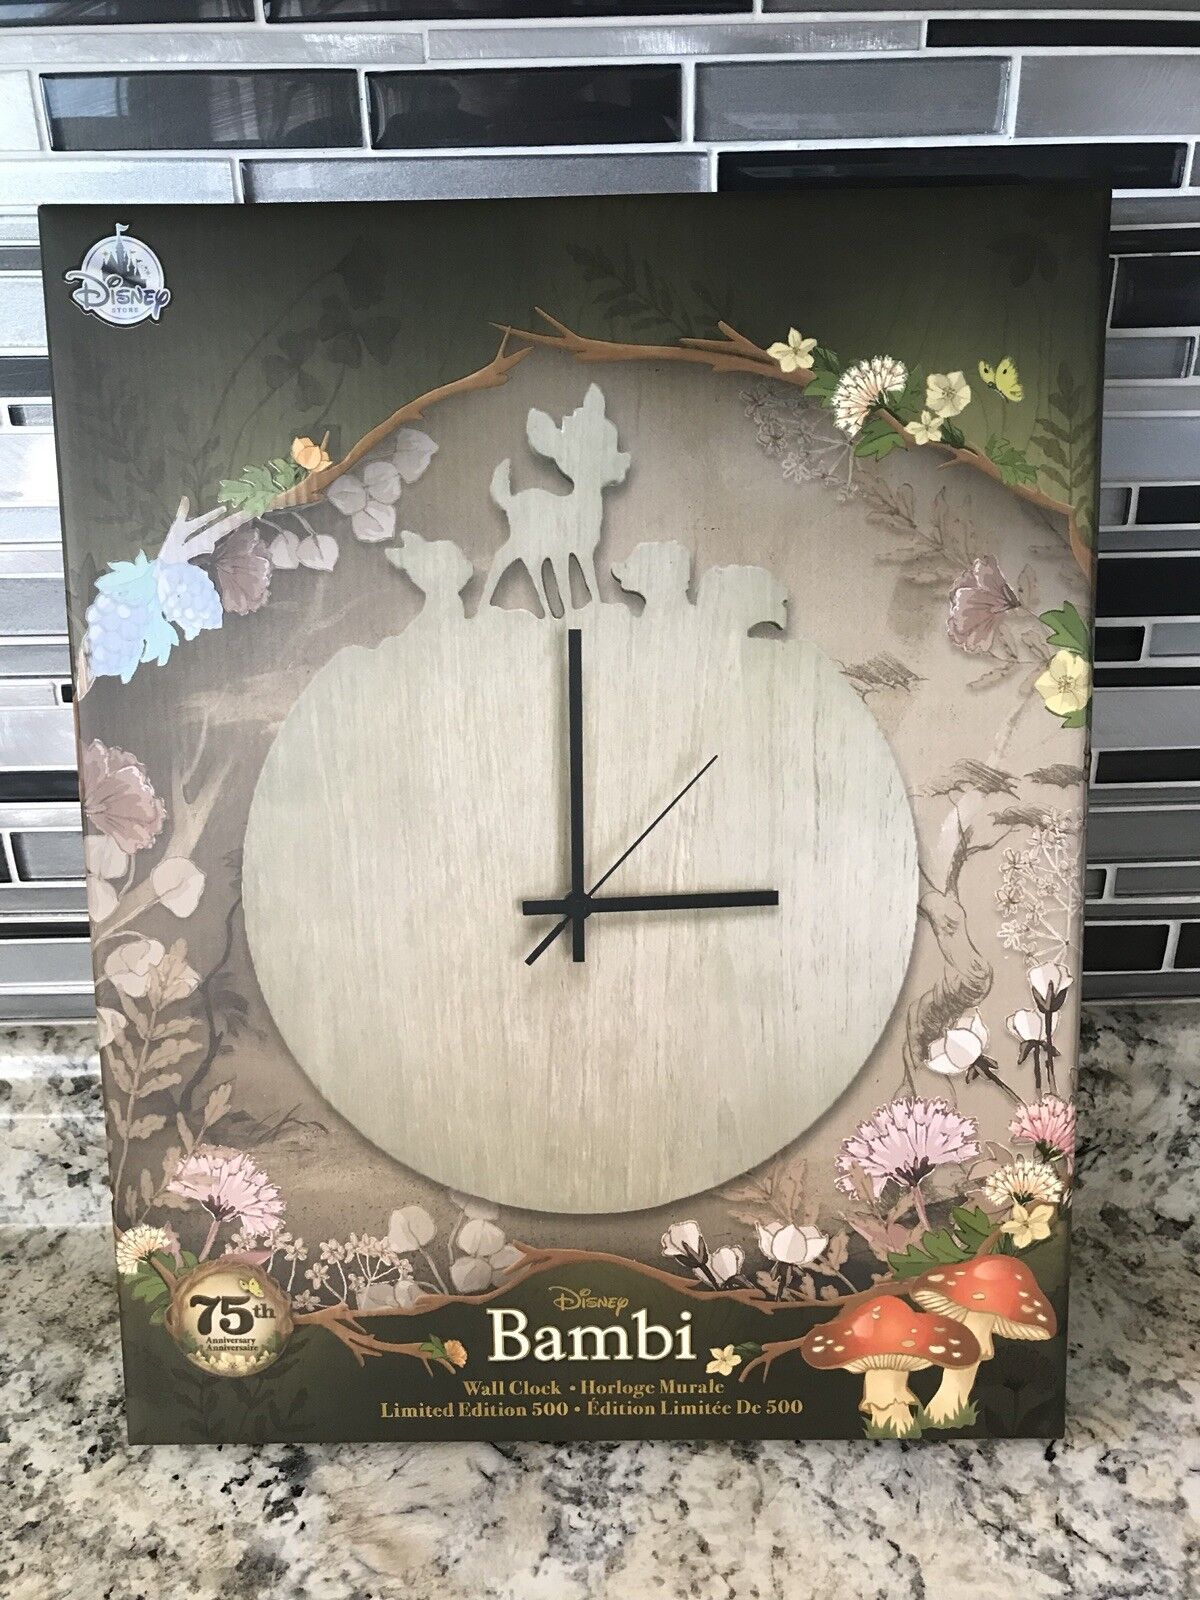 Disney Store Bambi 75th Anniversary Wall Clock Limited Edition Of 500 NWT D23